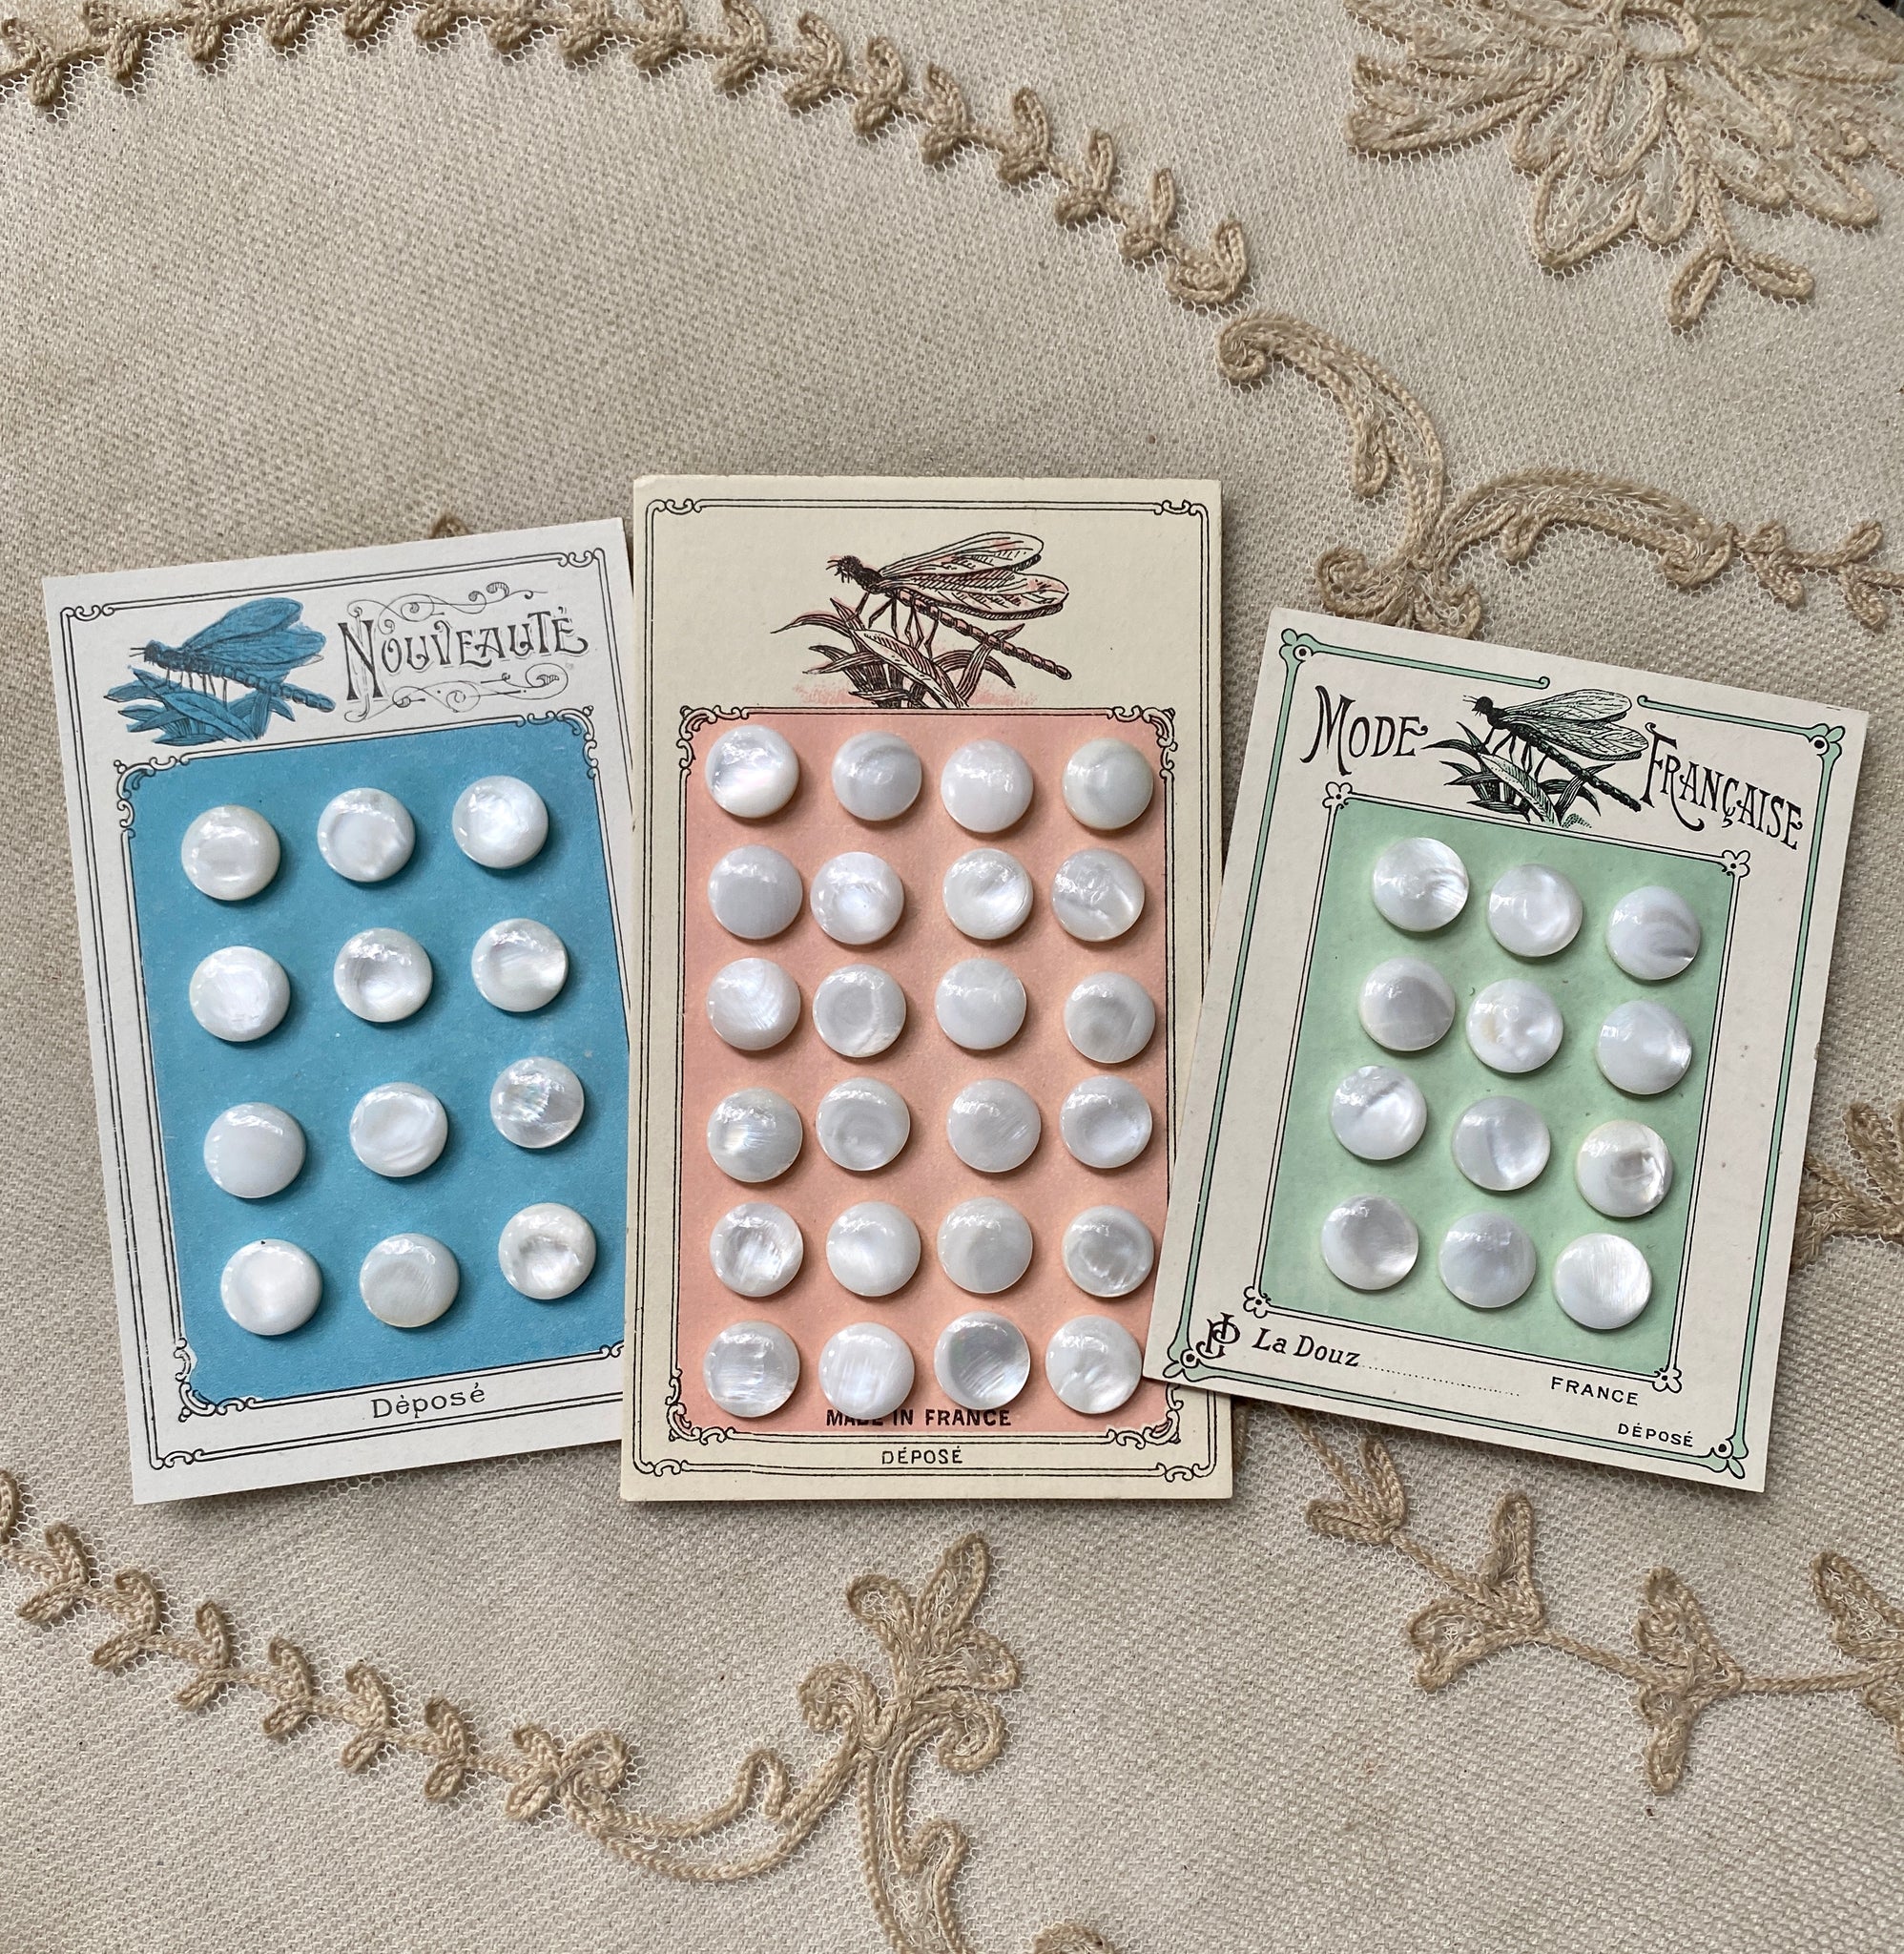 Agnes' Vintage World: Mother of pearl buttons and their cheap imitations